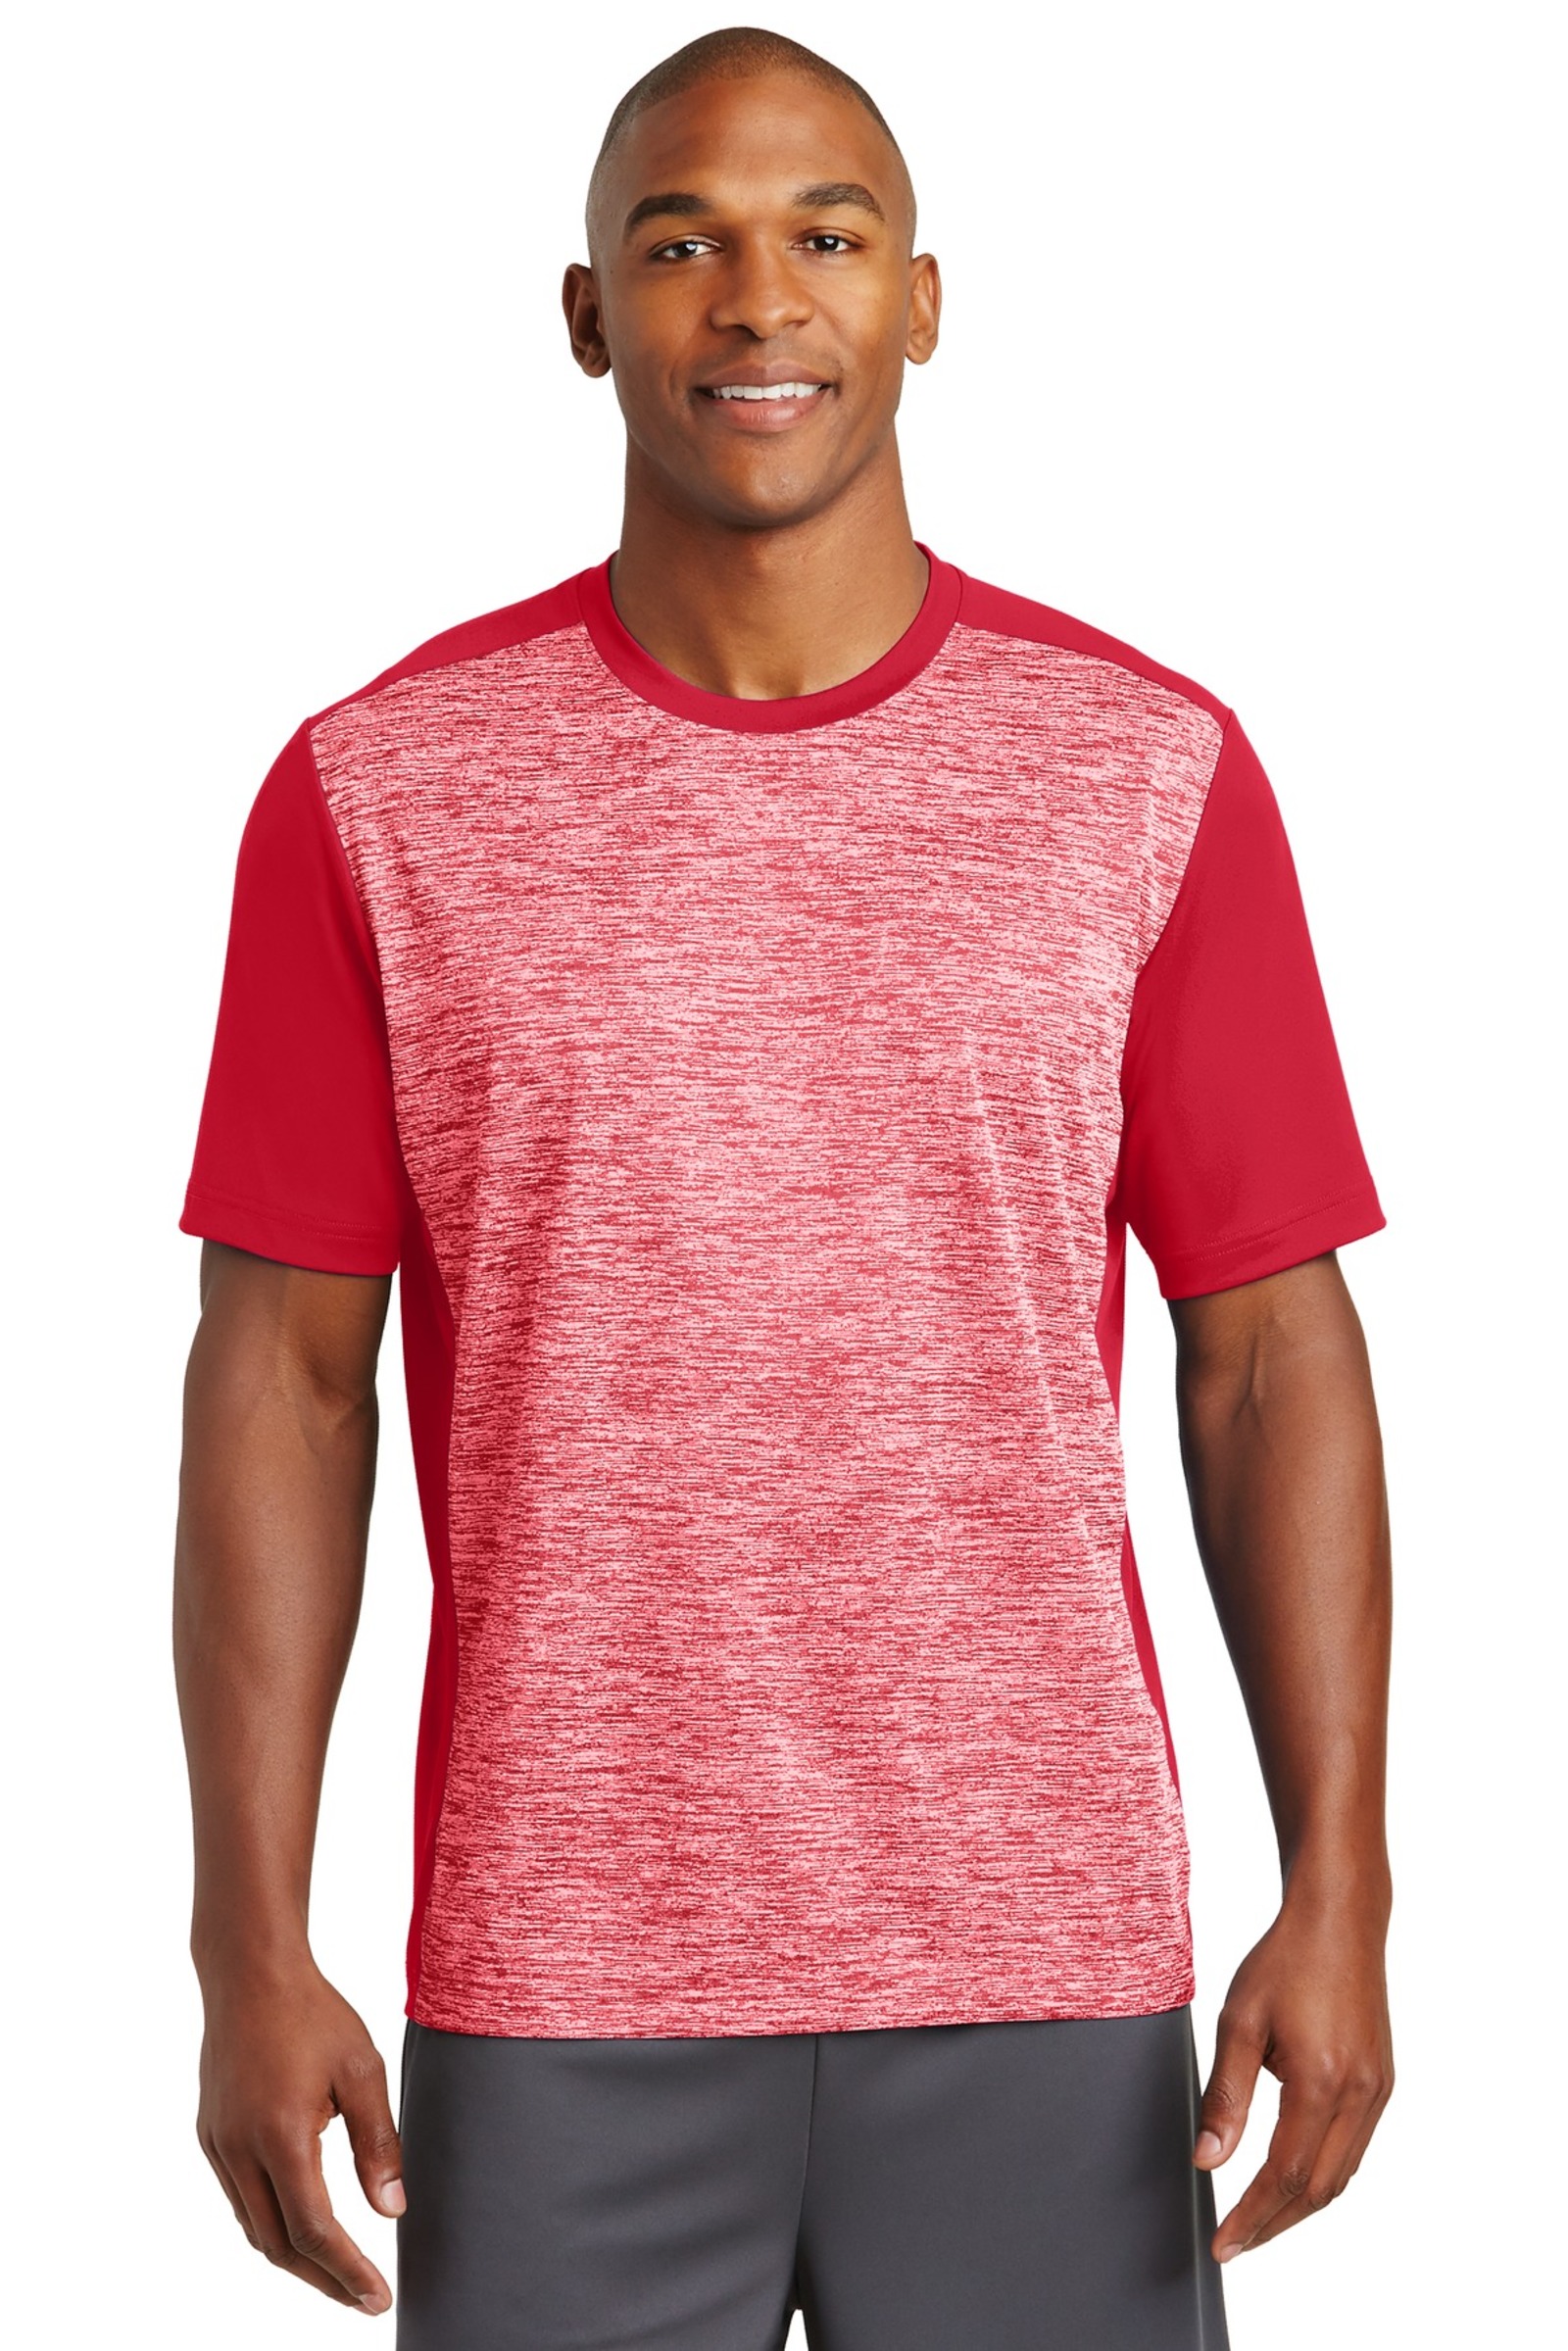 Sport-Tek Embroidered Men's PosiCharge Electric Heather Colorblock Tee